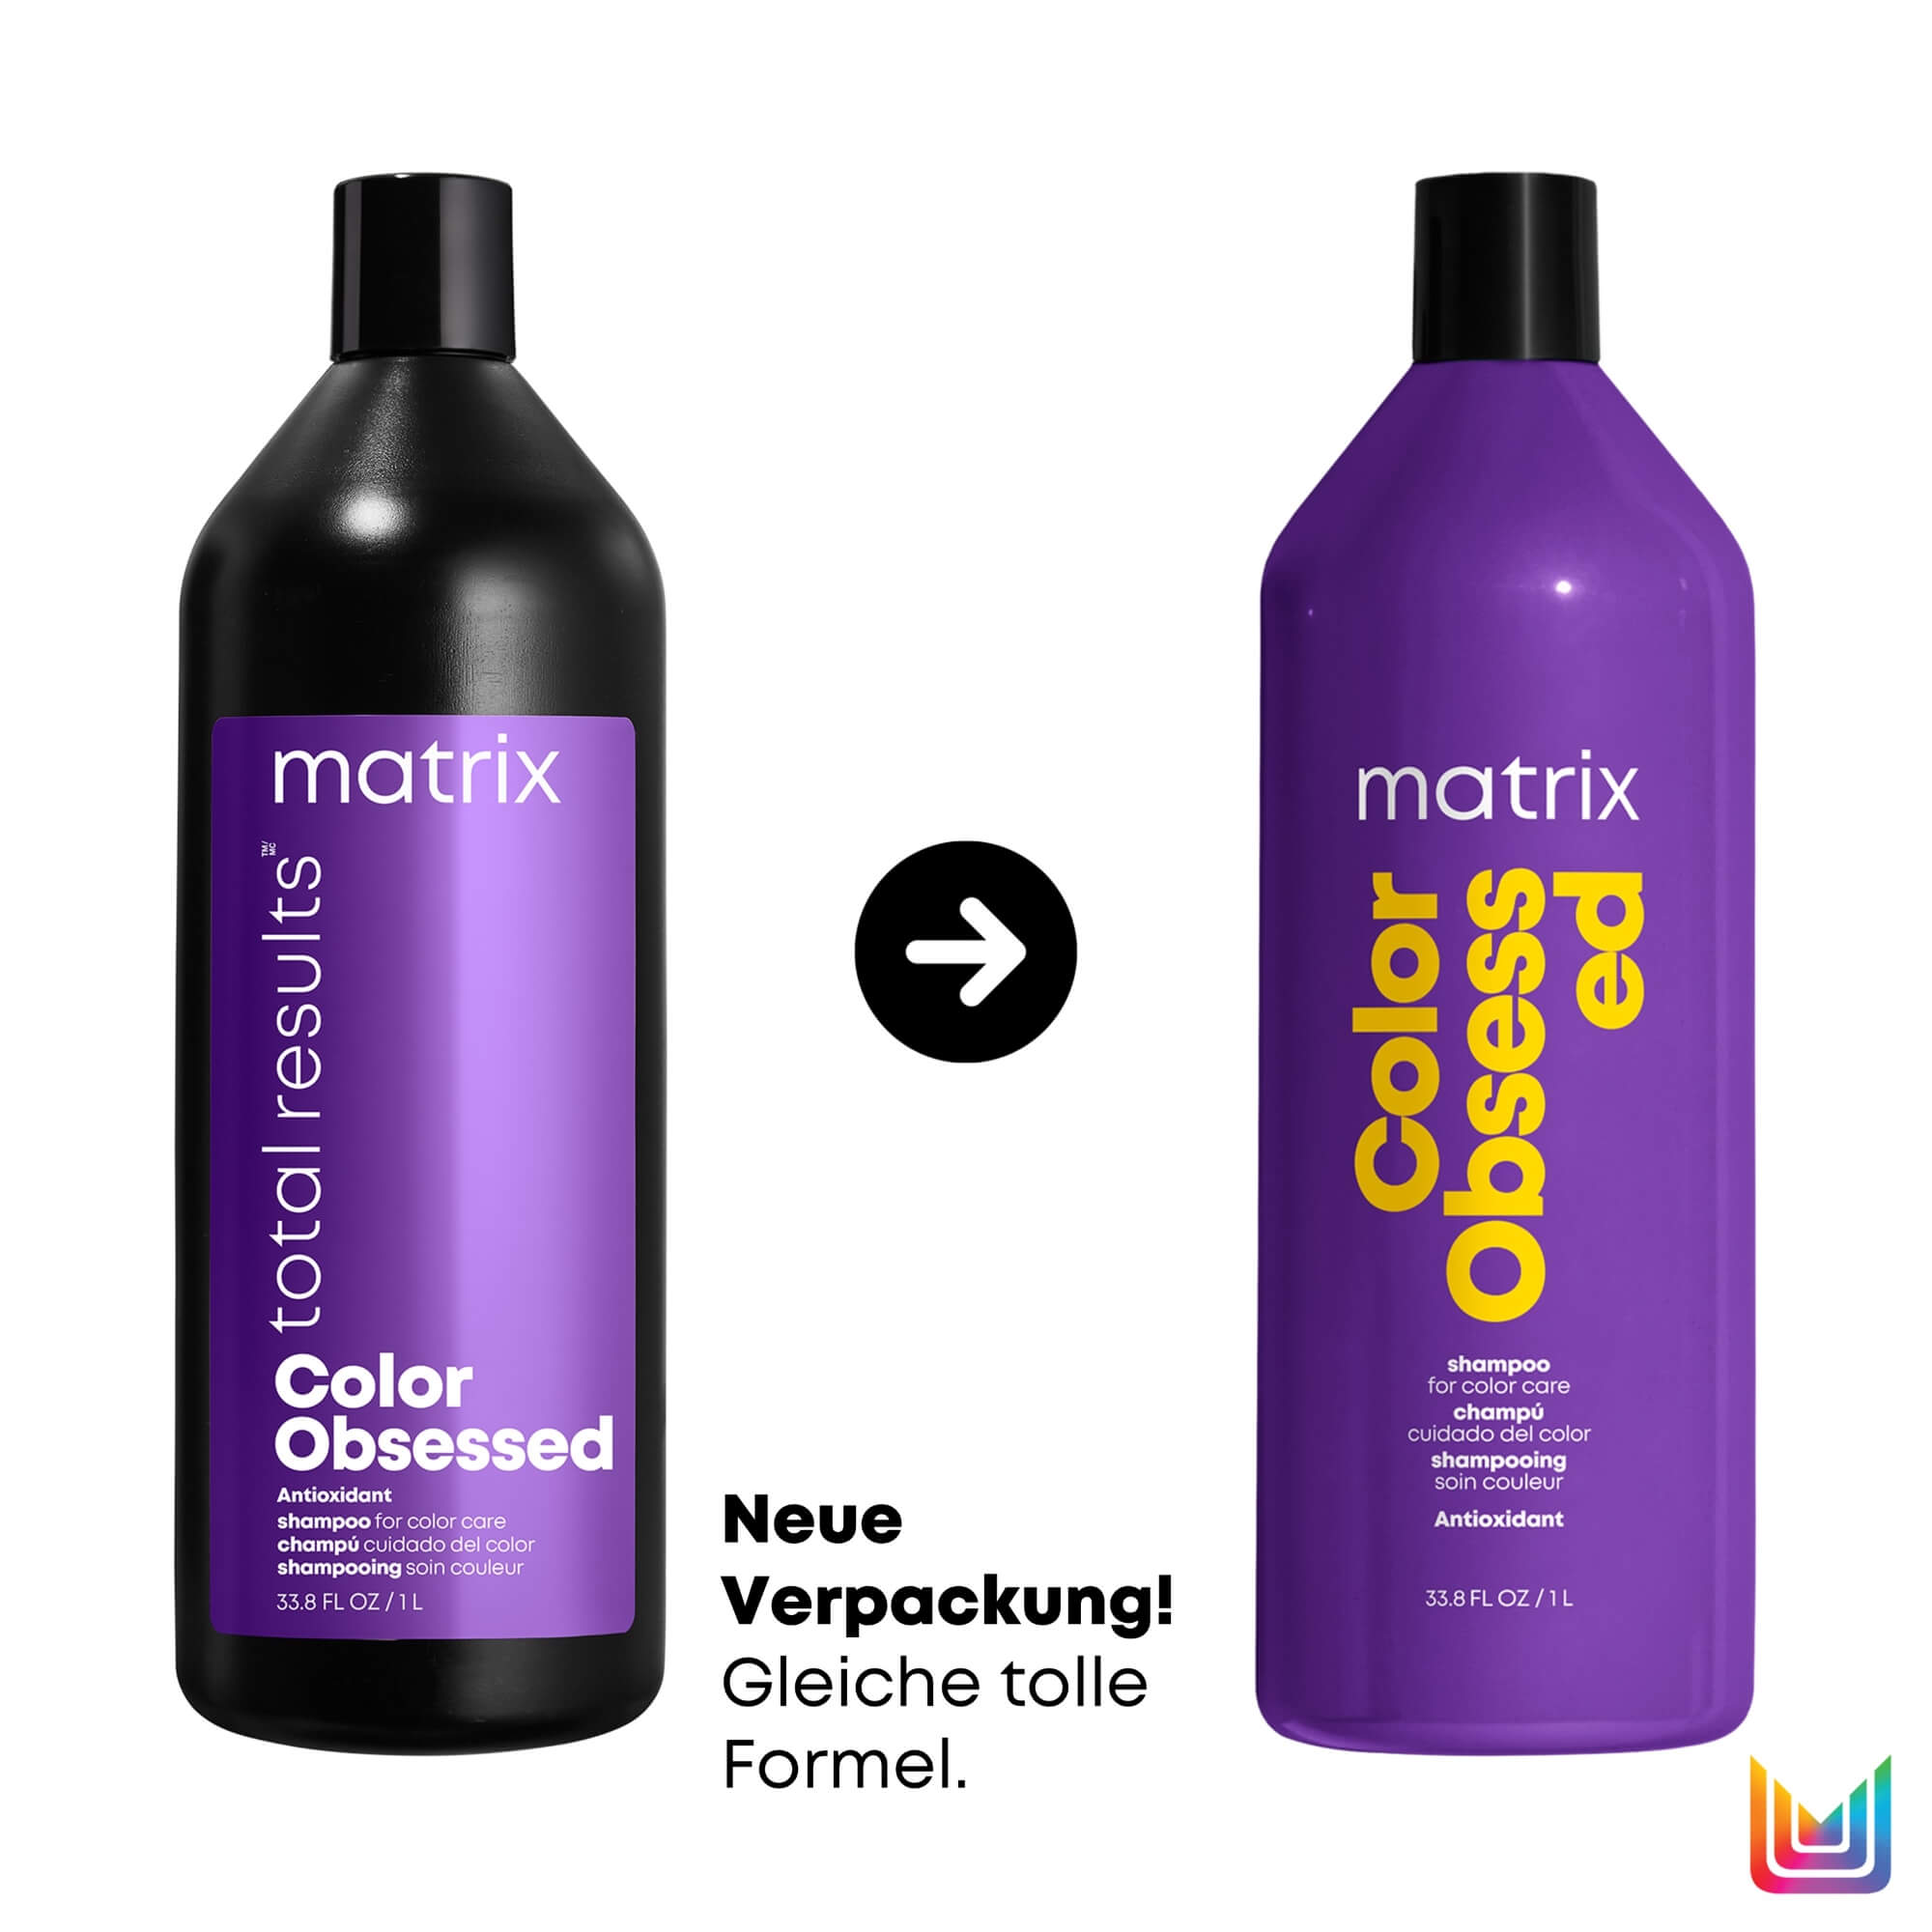 Matrix Total Results Color Obsessed Shampoo 